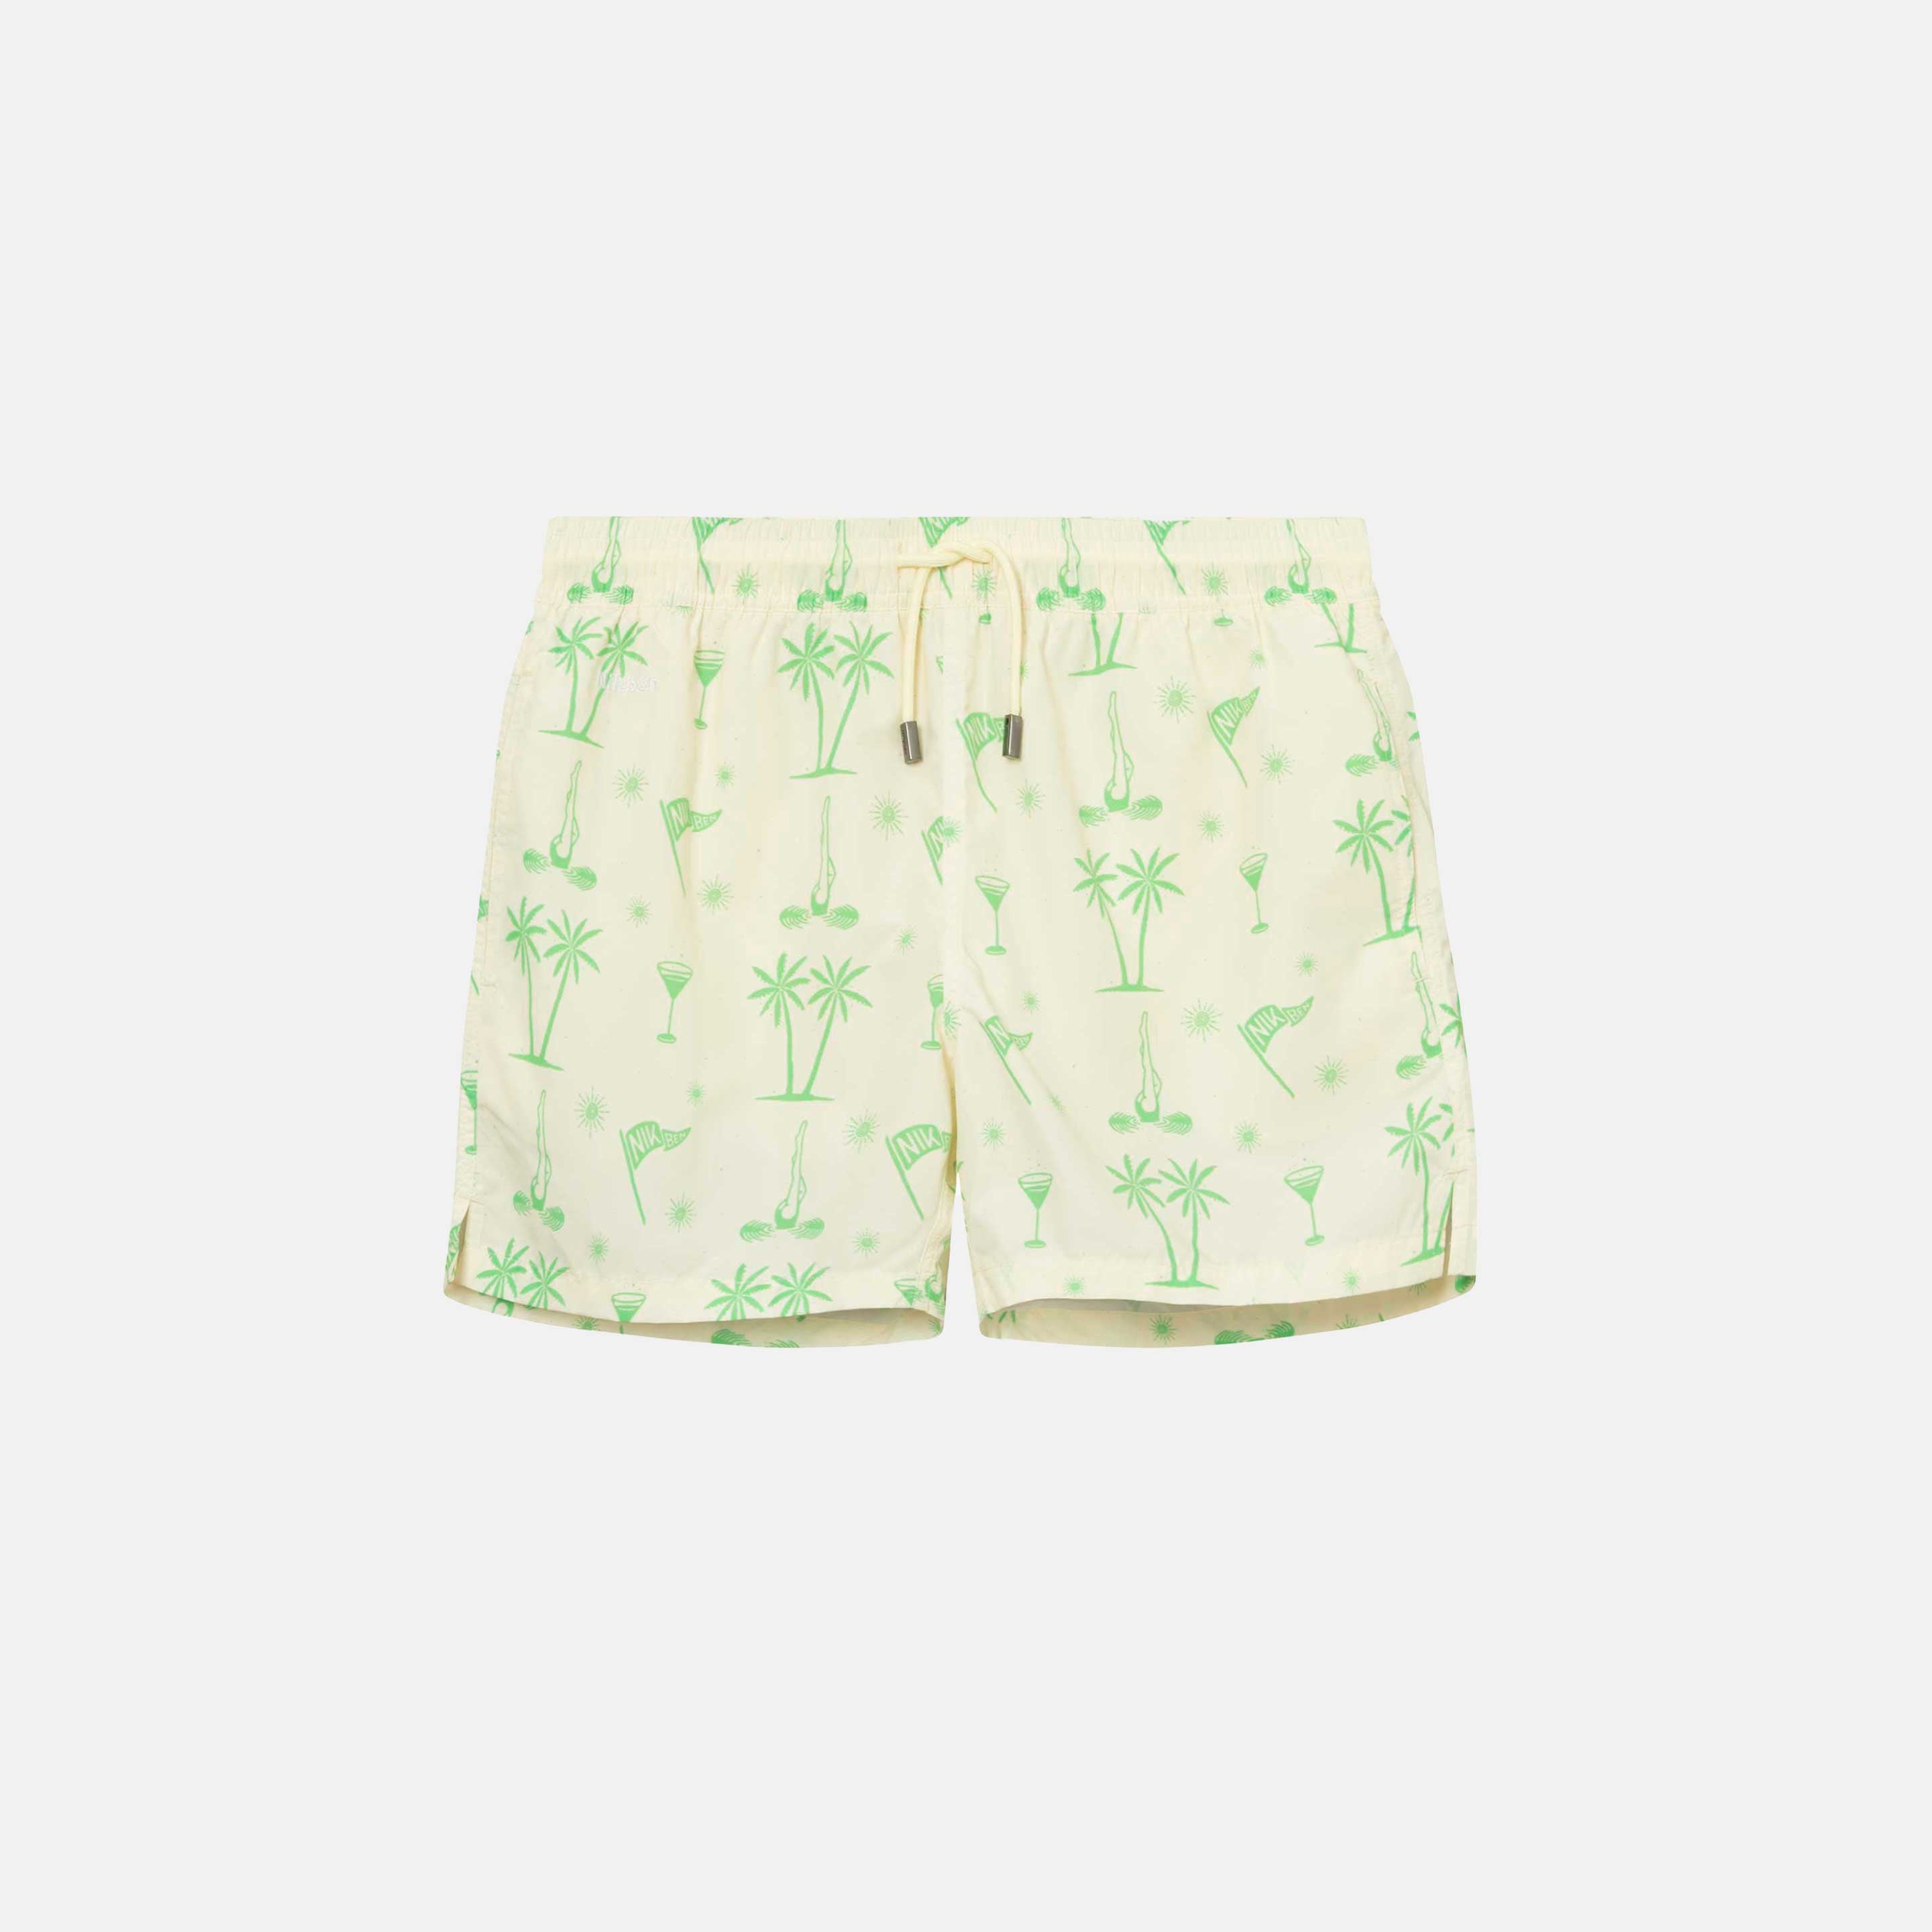 Light green patterned swim trunks. Mid length shorts with drawstring waistband and two side pockets.